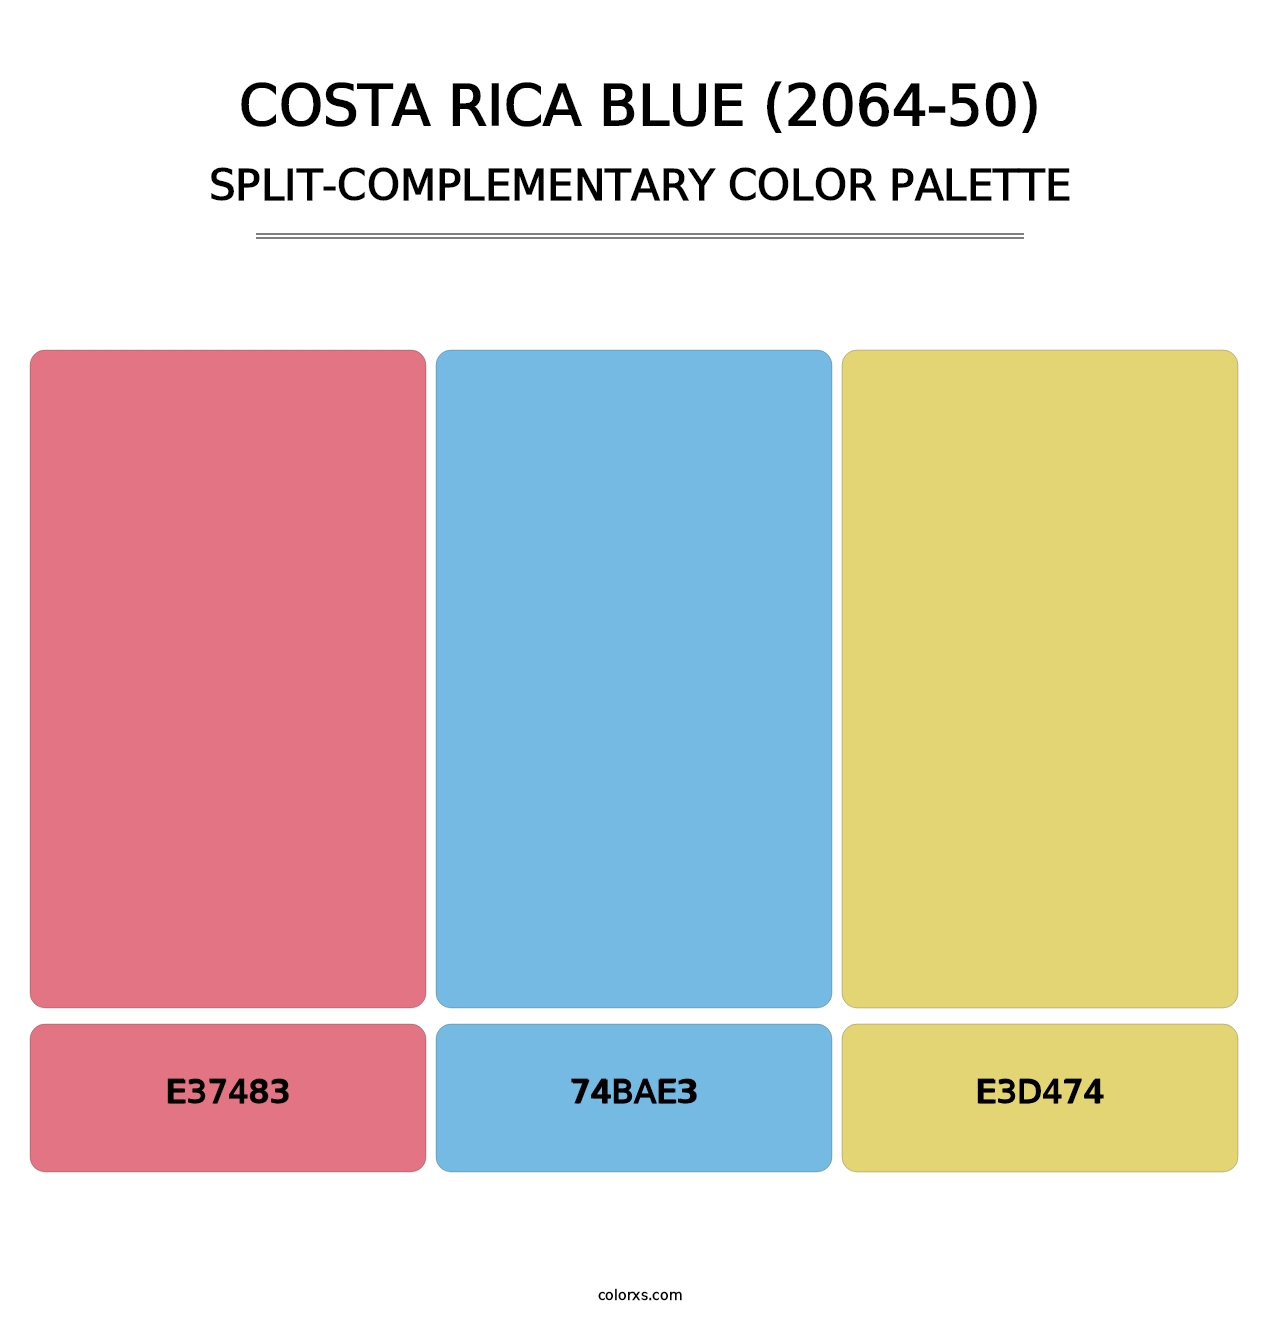 Costa Rica Blue (2064-50) - Split-Complementary Color Palette